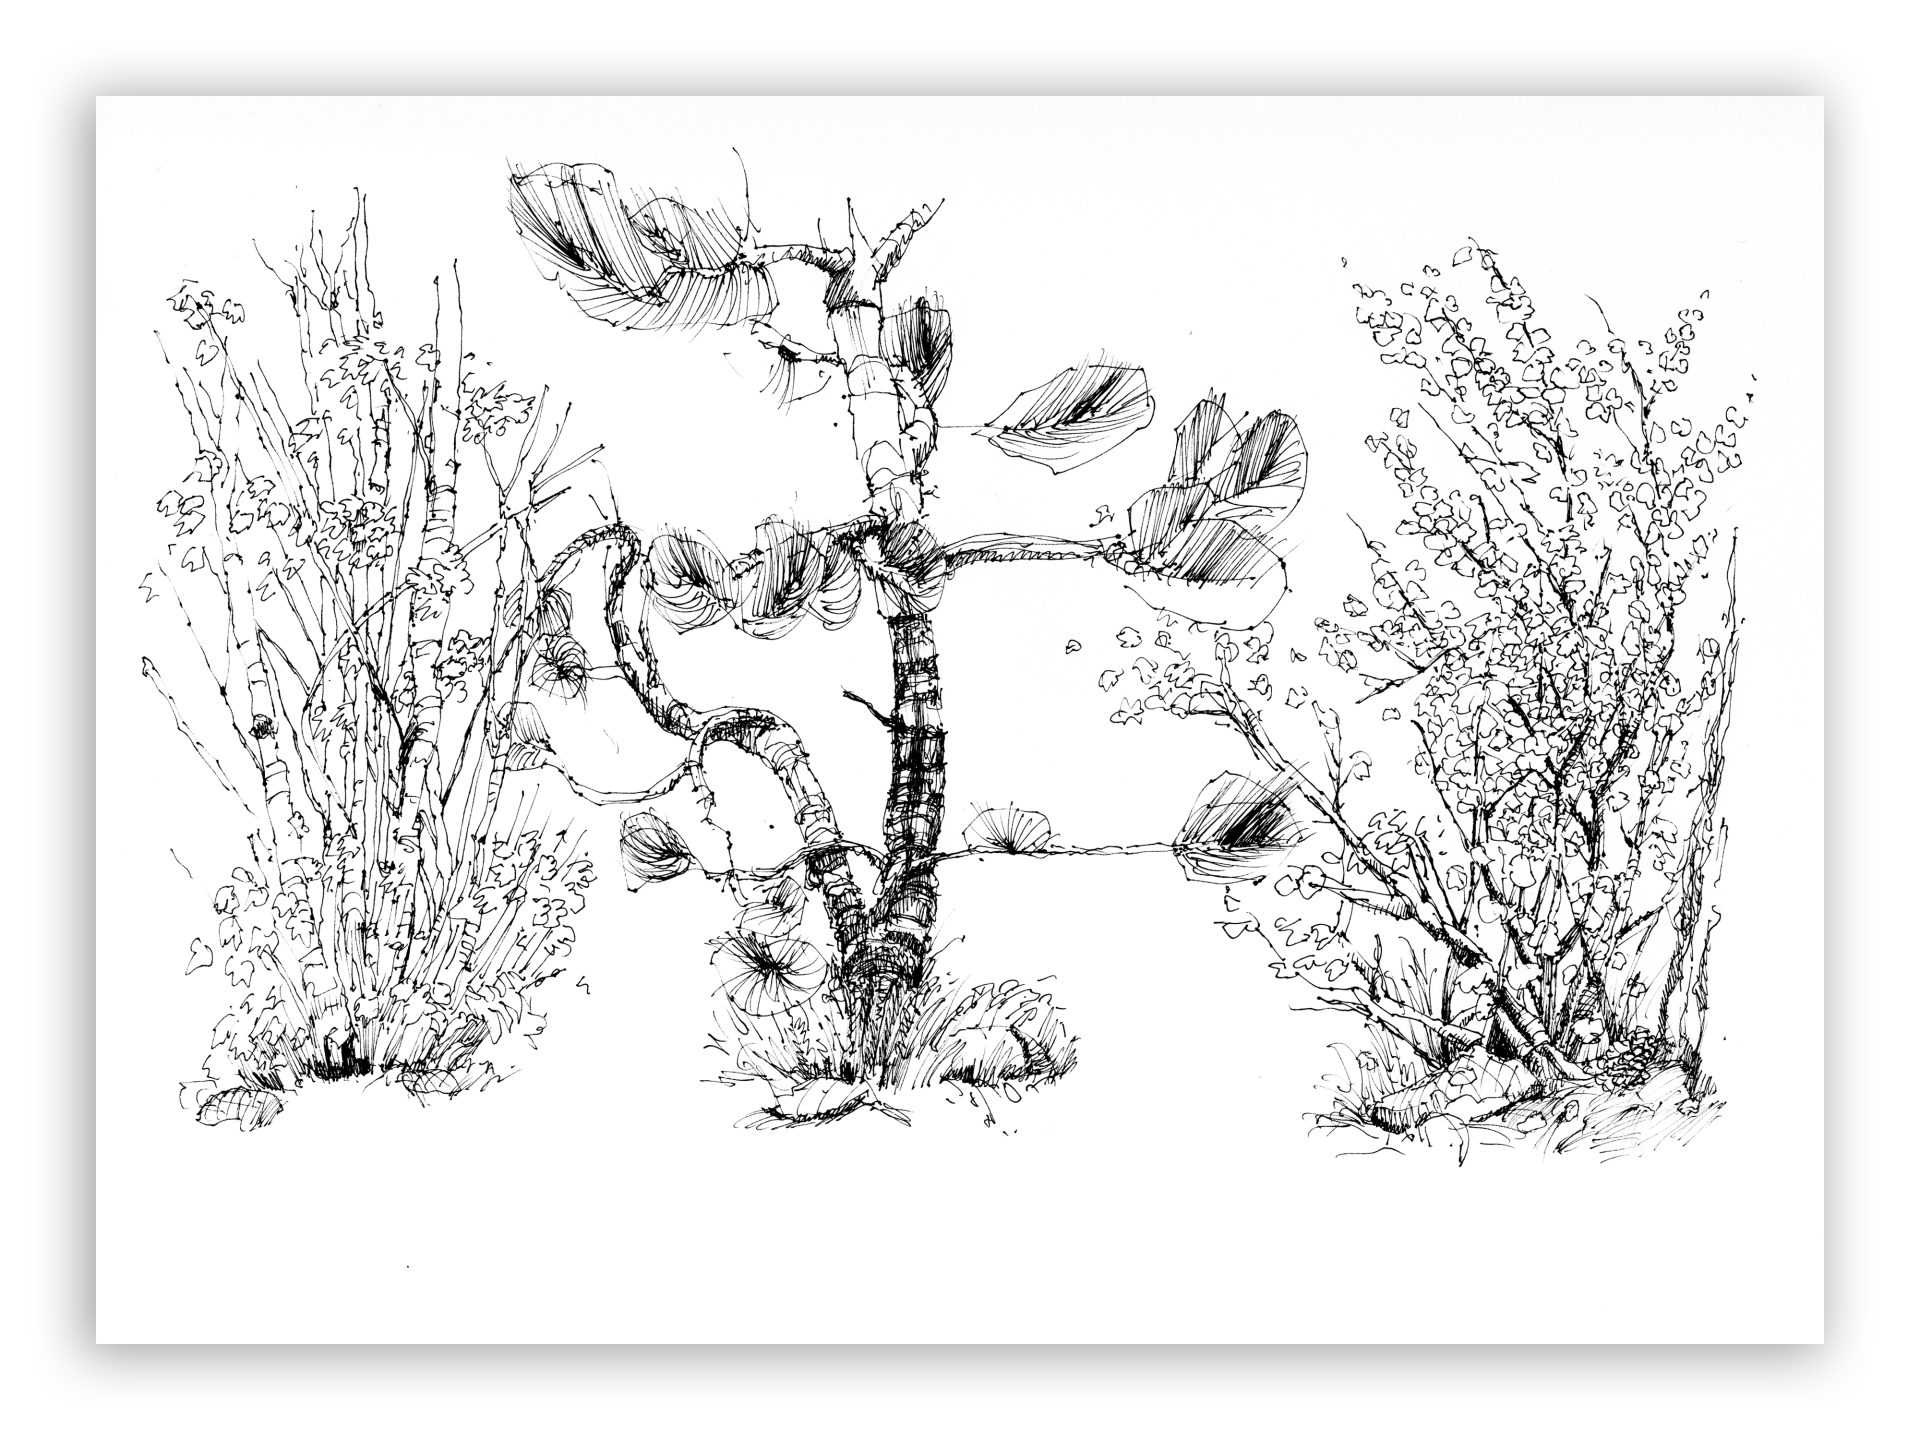 ink drawing of dwarf ponderosa and some other shrubs